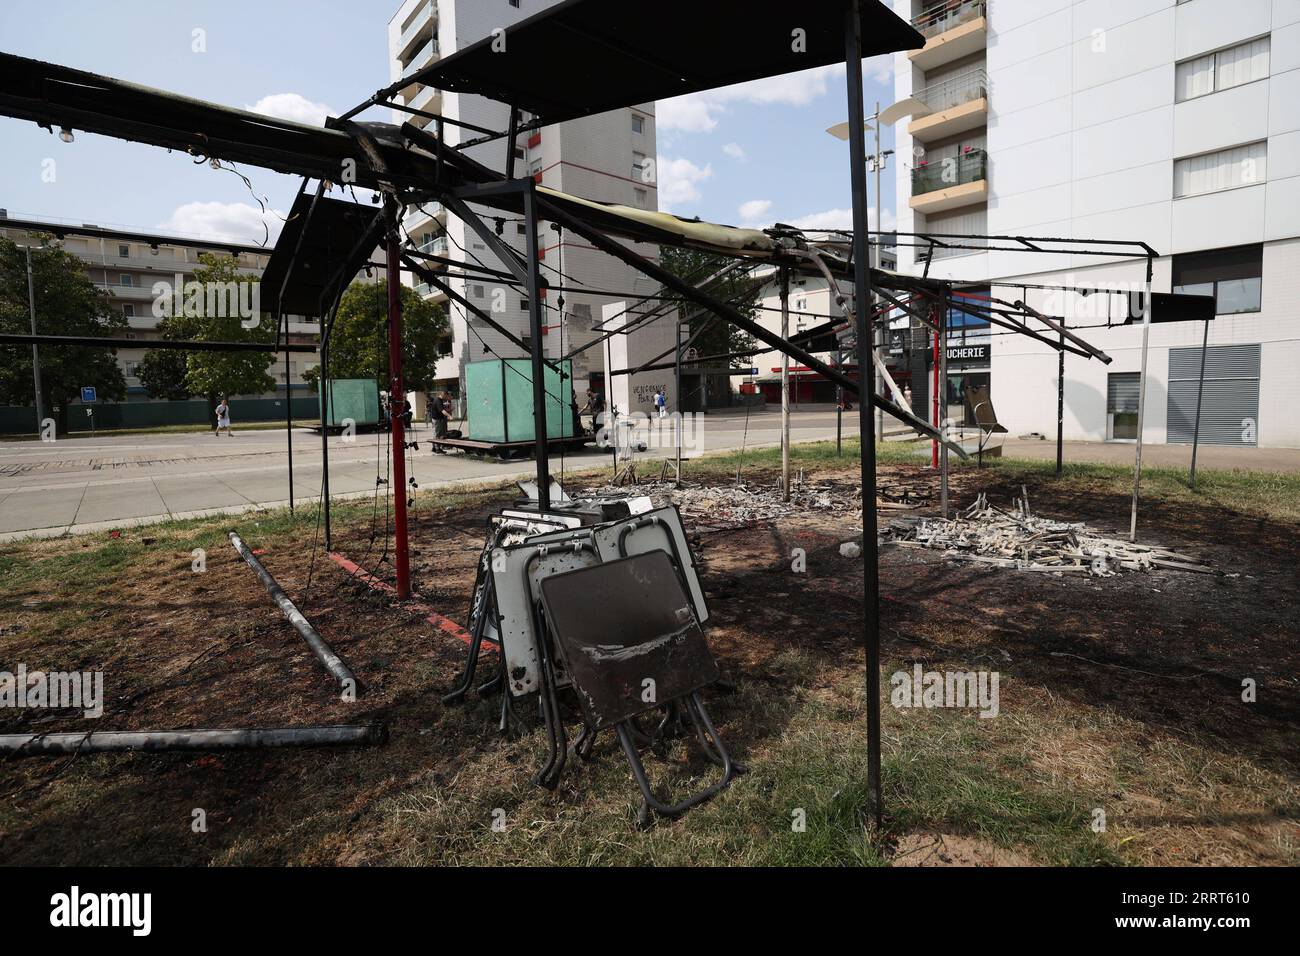 Frankreich, Proteste und Ausschreitungen nach tödlichen Polizeischüssen auf 17-Jährigen 230701 -- NANTERREFRANCE, July 1, 2023 -- The terrace of a restaurant is totally burnt and destroyed in Nanterre, western Paris suburbs, France, June 30, 2023. Violence continued in France overnight from Thursday to Friday after a police officer shot dead a 17-year-old teen on Tuesday in Nanterre, western Paris suburbs, with 667 arrests across the country, French Interior Minister Gerald Darmanin announced on Friday.  FRANCE-NANTERRE-FATAL SHOOTING OF A TEEN-PROTEST-VIOLENCE-AFTERMATH GaoxJing PUBLICATIONxN Stock Photo